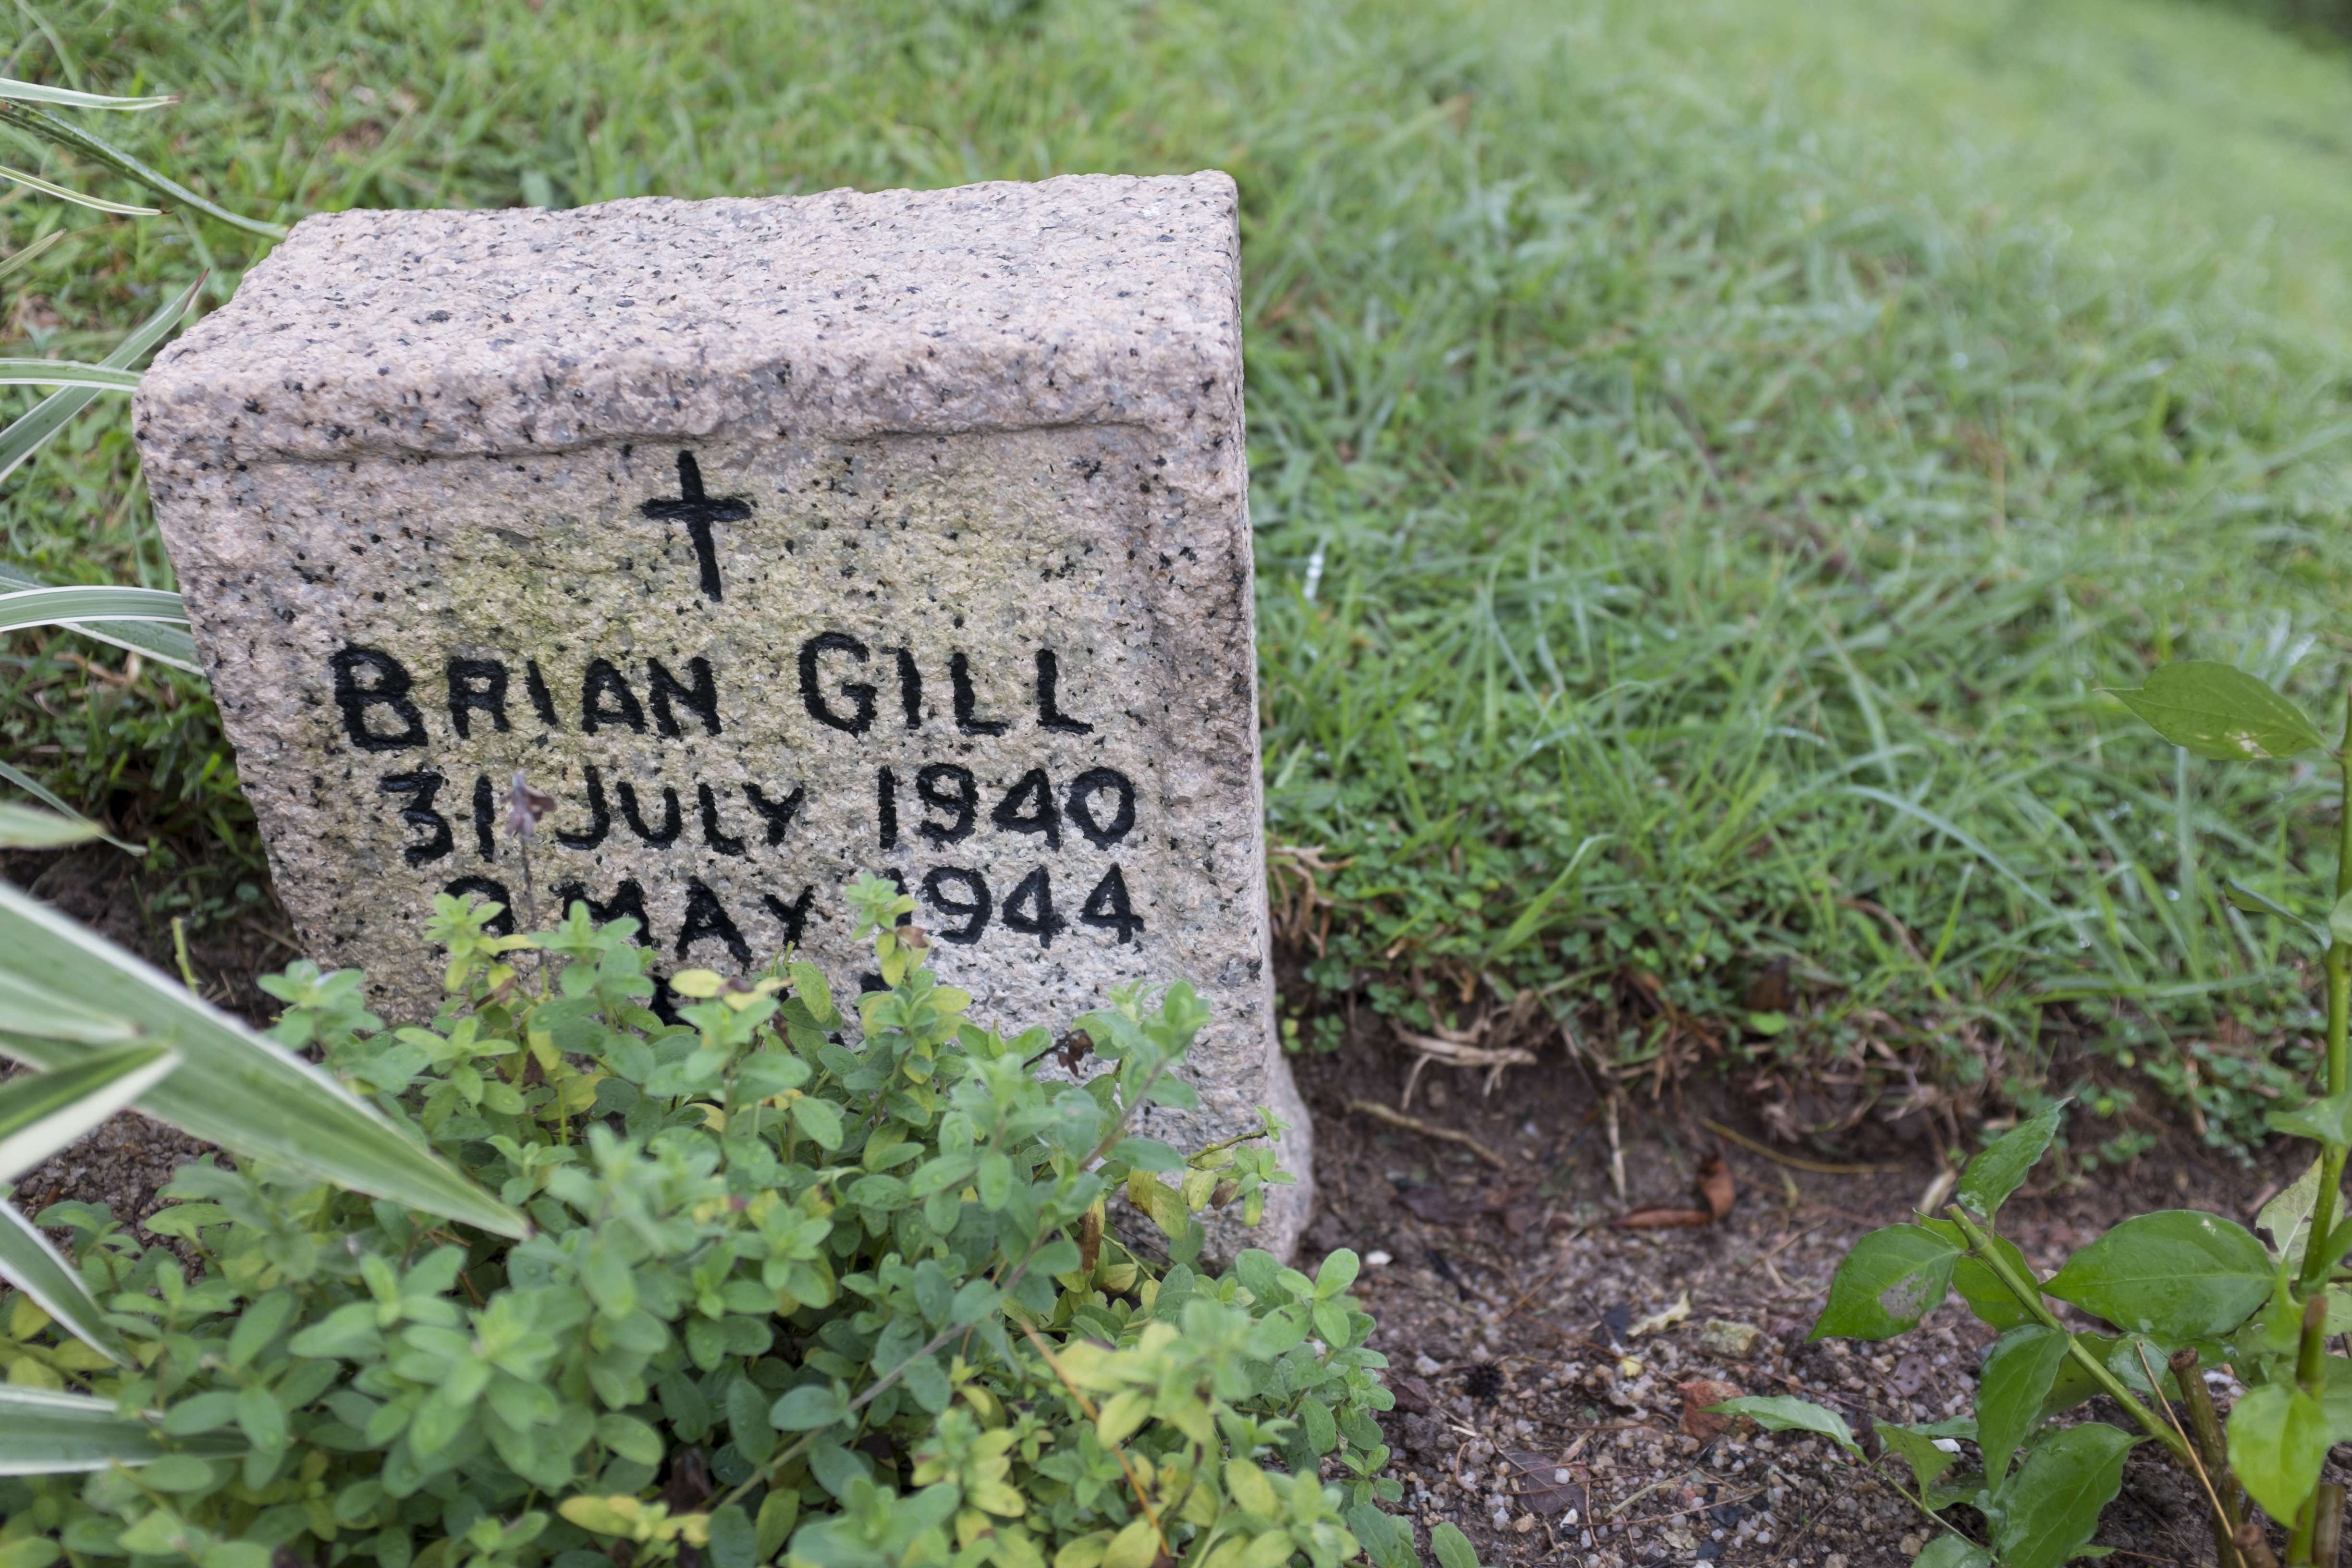 ‘You were two sons rolled into one,’ my mother told me the first time we visited my half-brother Brian’s grave in Stanley Military Cemetery, writes Ian Gill, who but for his death in 1944 might never have been conceived at the nearby internment camp